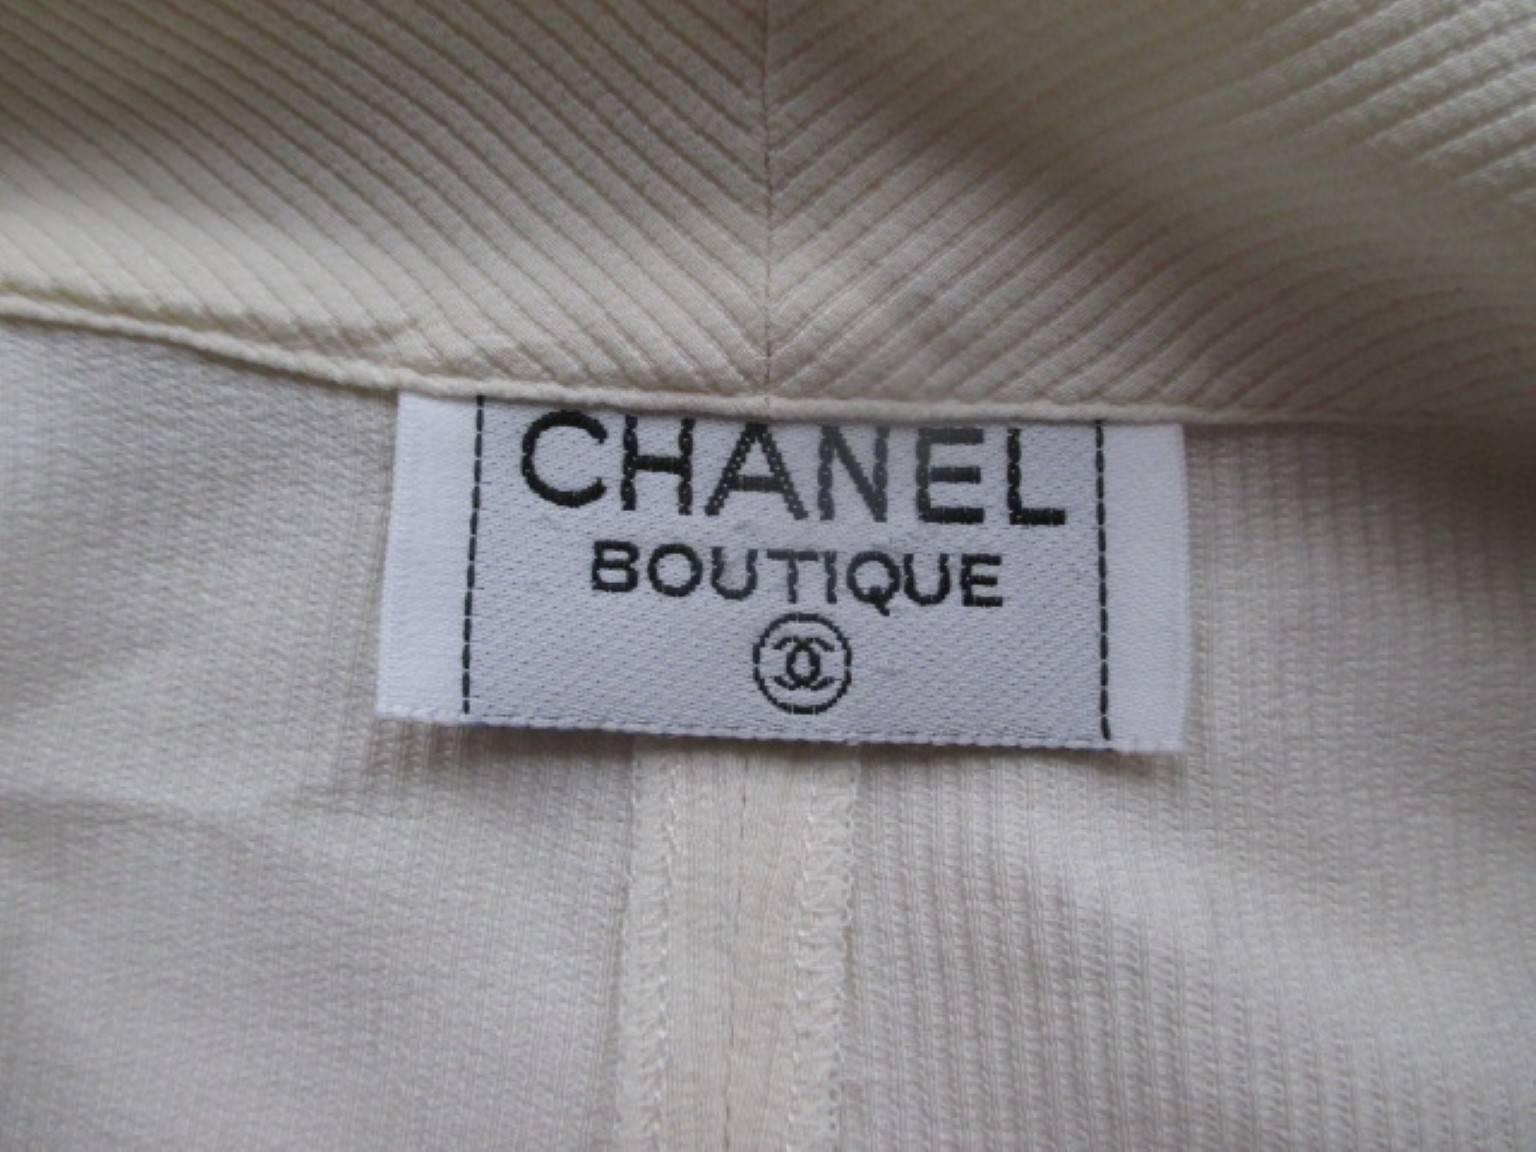 This Chanel blouse has 6 flower gold colored buttons( they have some wear).
Color is cream and in good preloved condition.
Size is XS-S
Please note that vintage items are not new and therefore might have minor imperfections